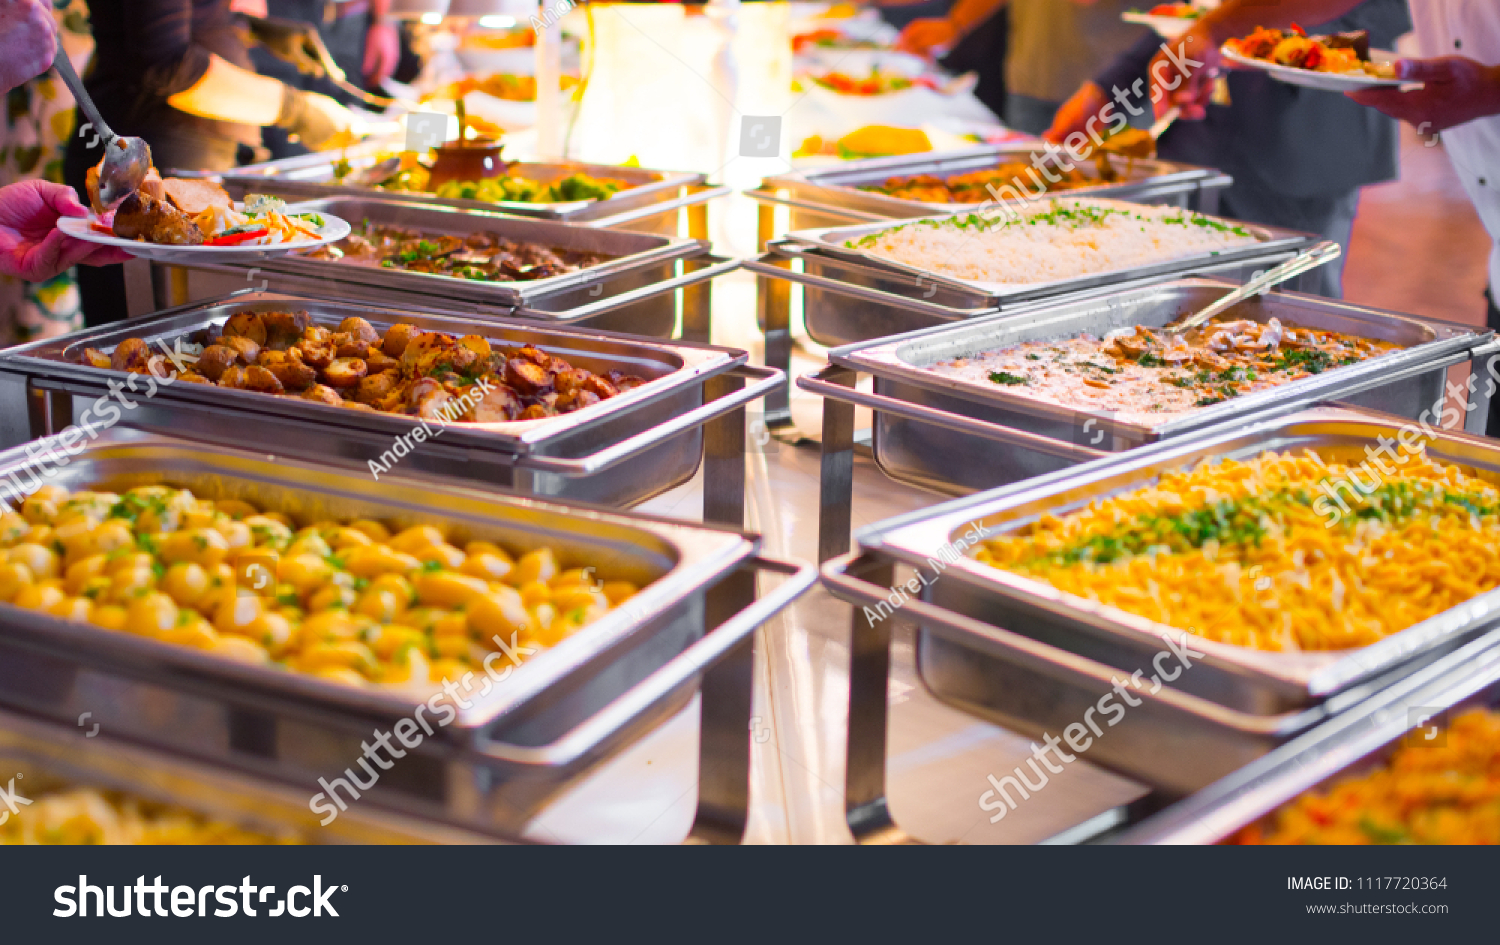 People group catering buffet food indoor in luxury restaurant with meat colorful fruits and vegetables. #1117720364